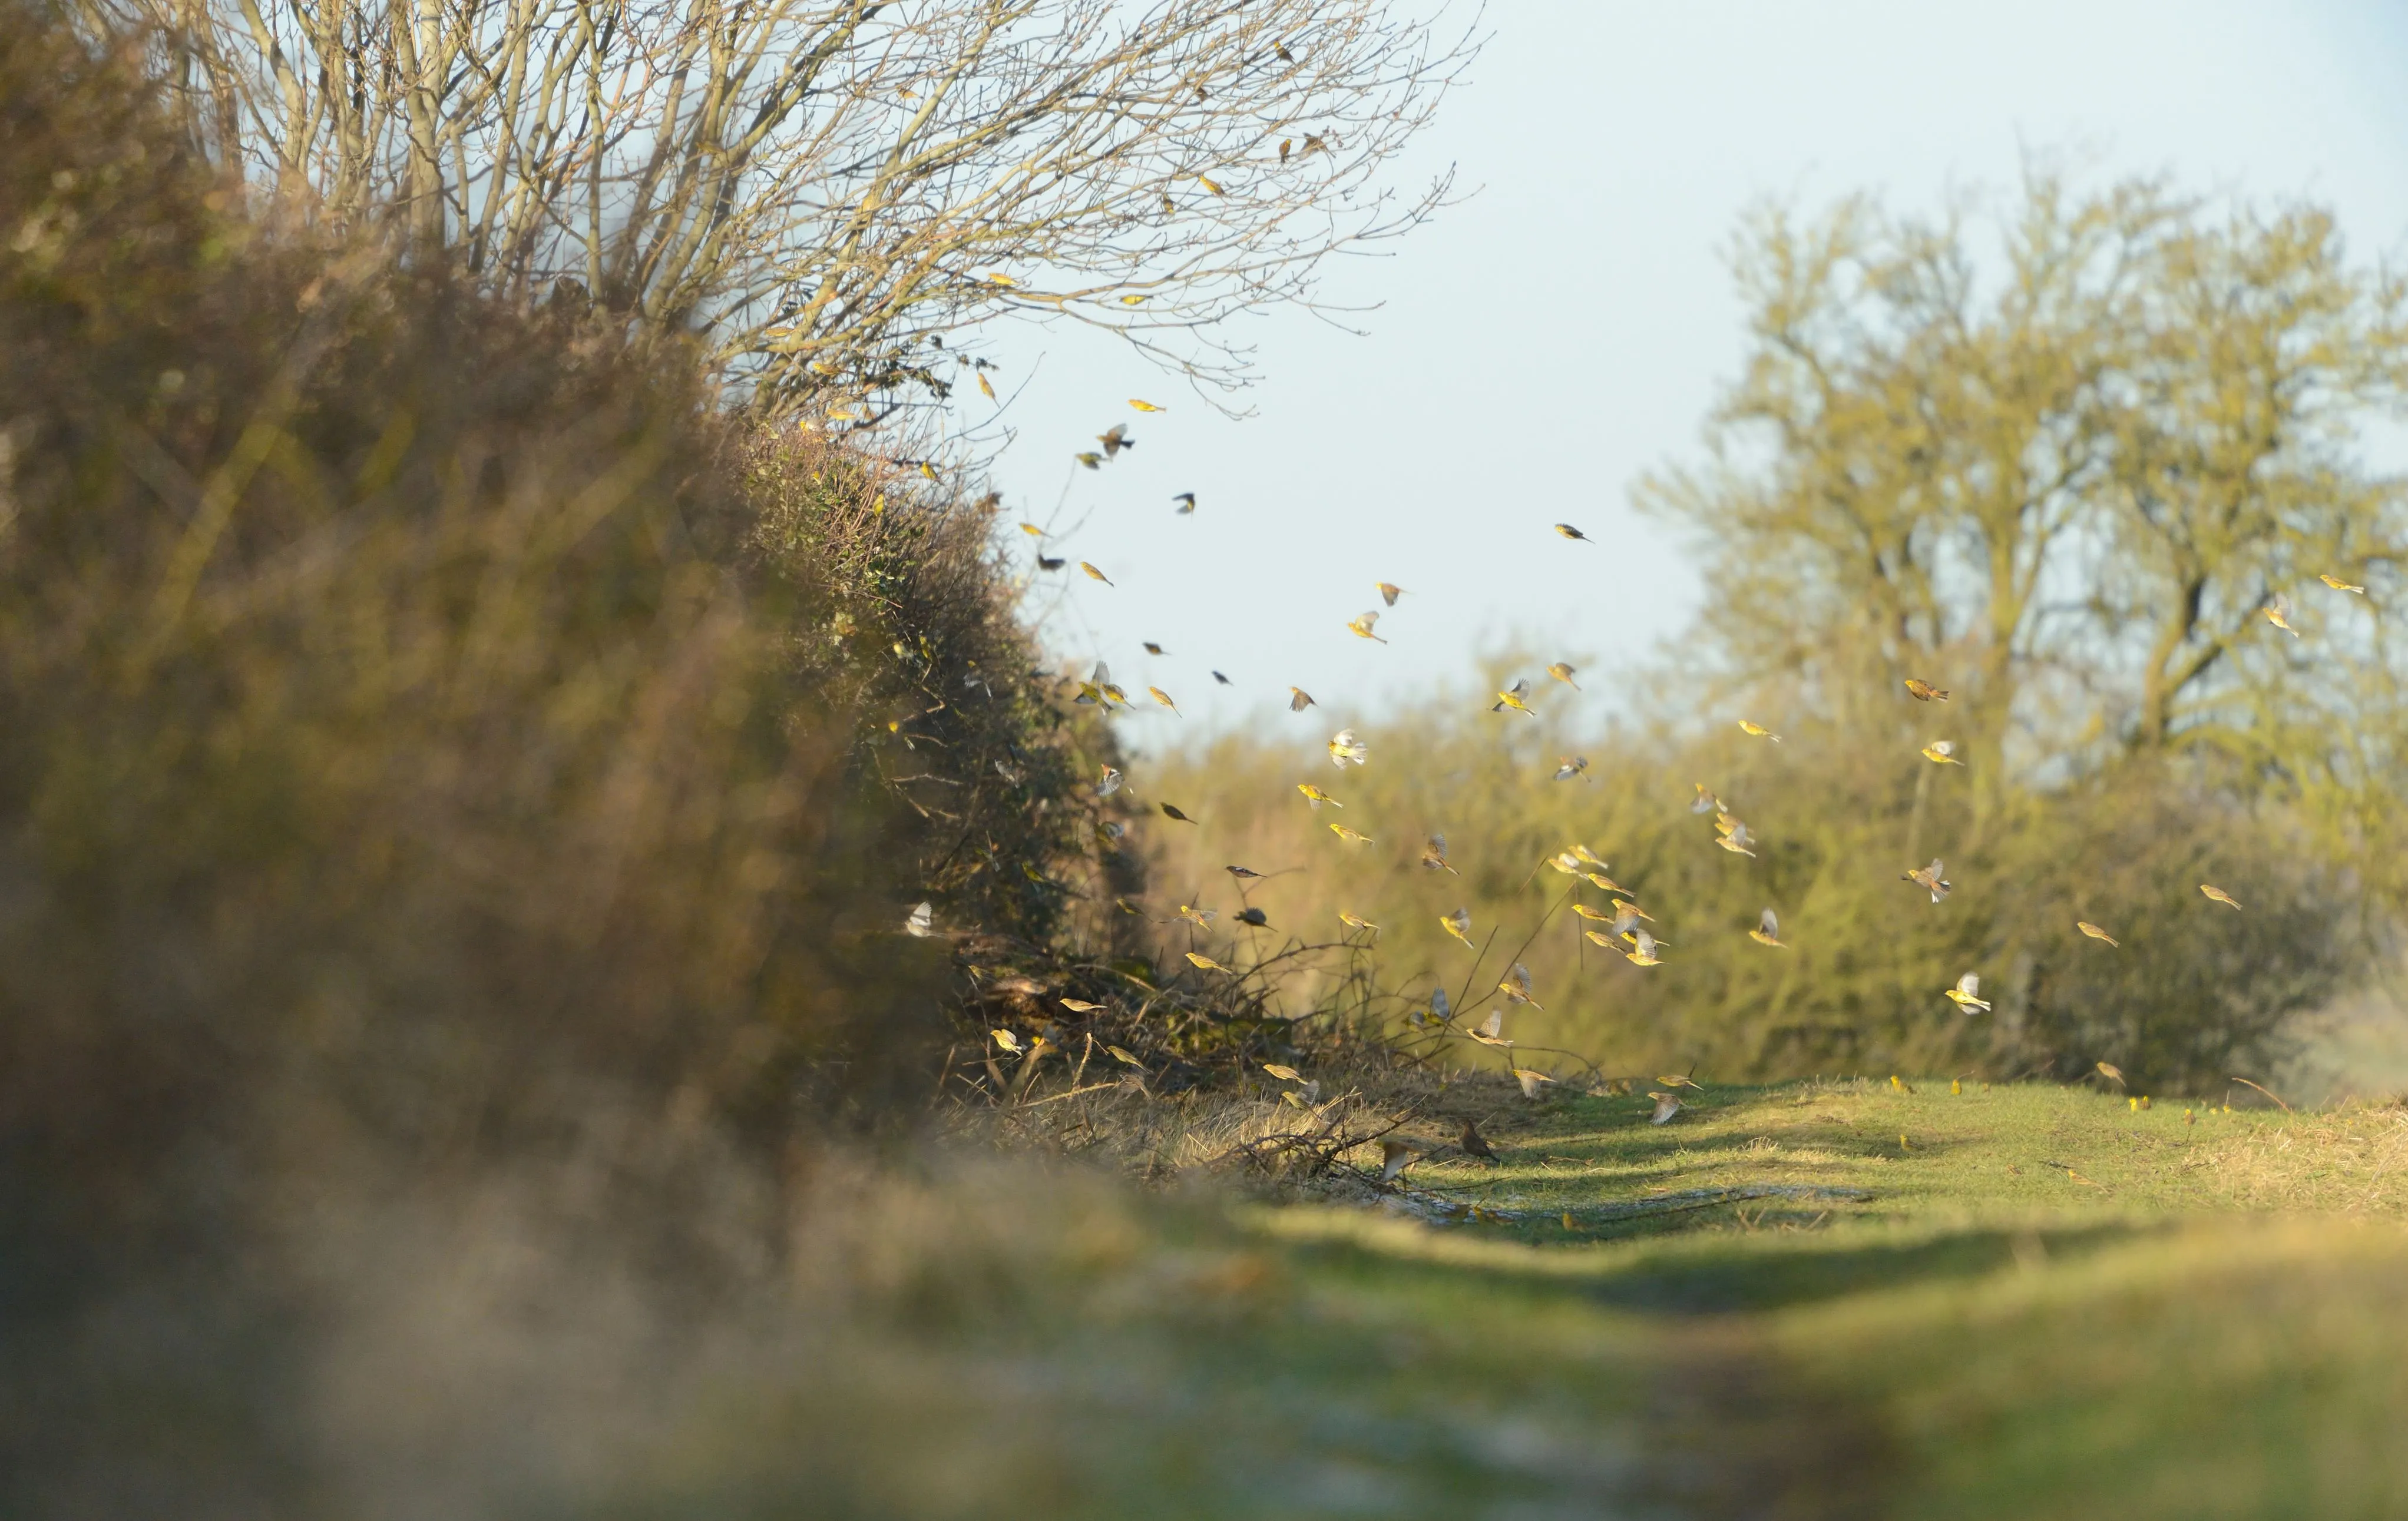 A footpath lined with hedgerow with a flock of birds fluttering to seek refuge.